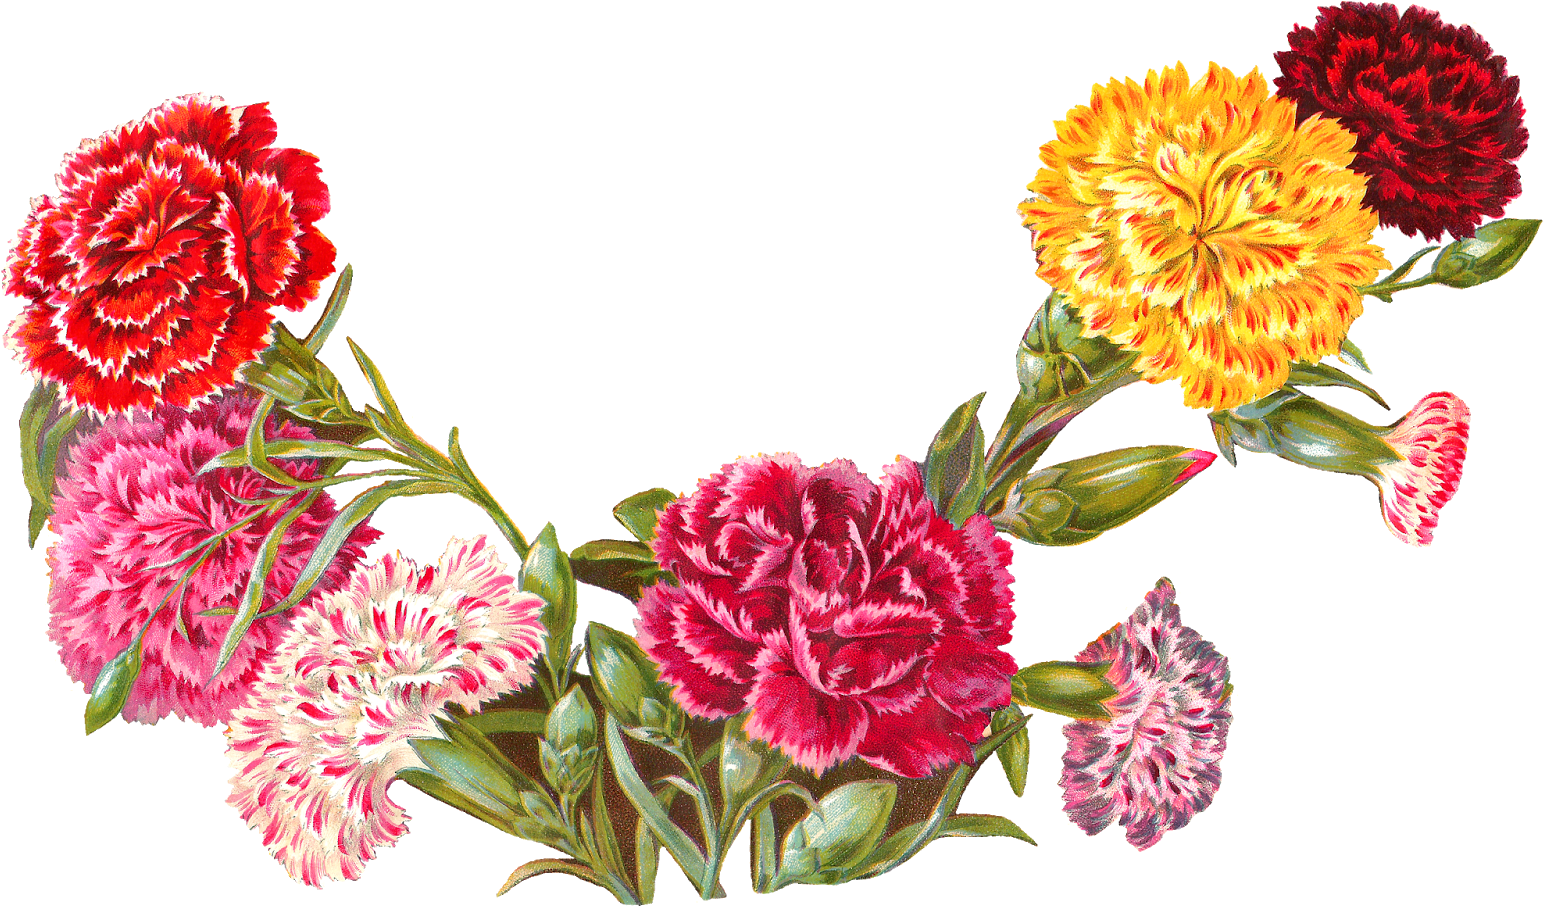 And The Shape Of The Flower Image Makes It A Perfect - Clip Art Carnation Illustration (1600x947)